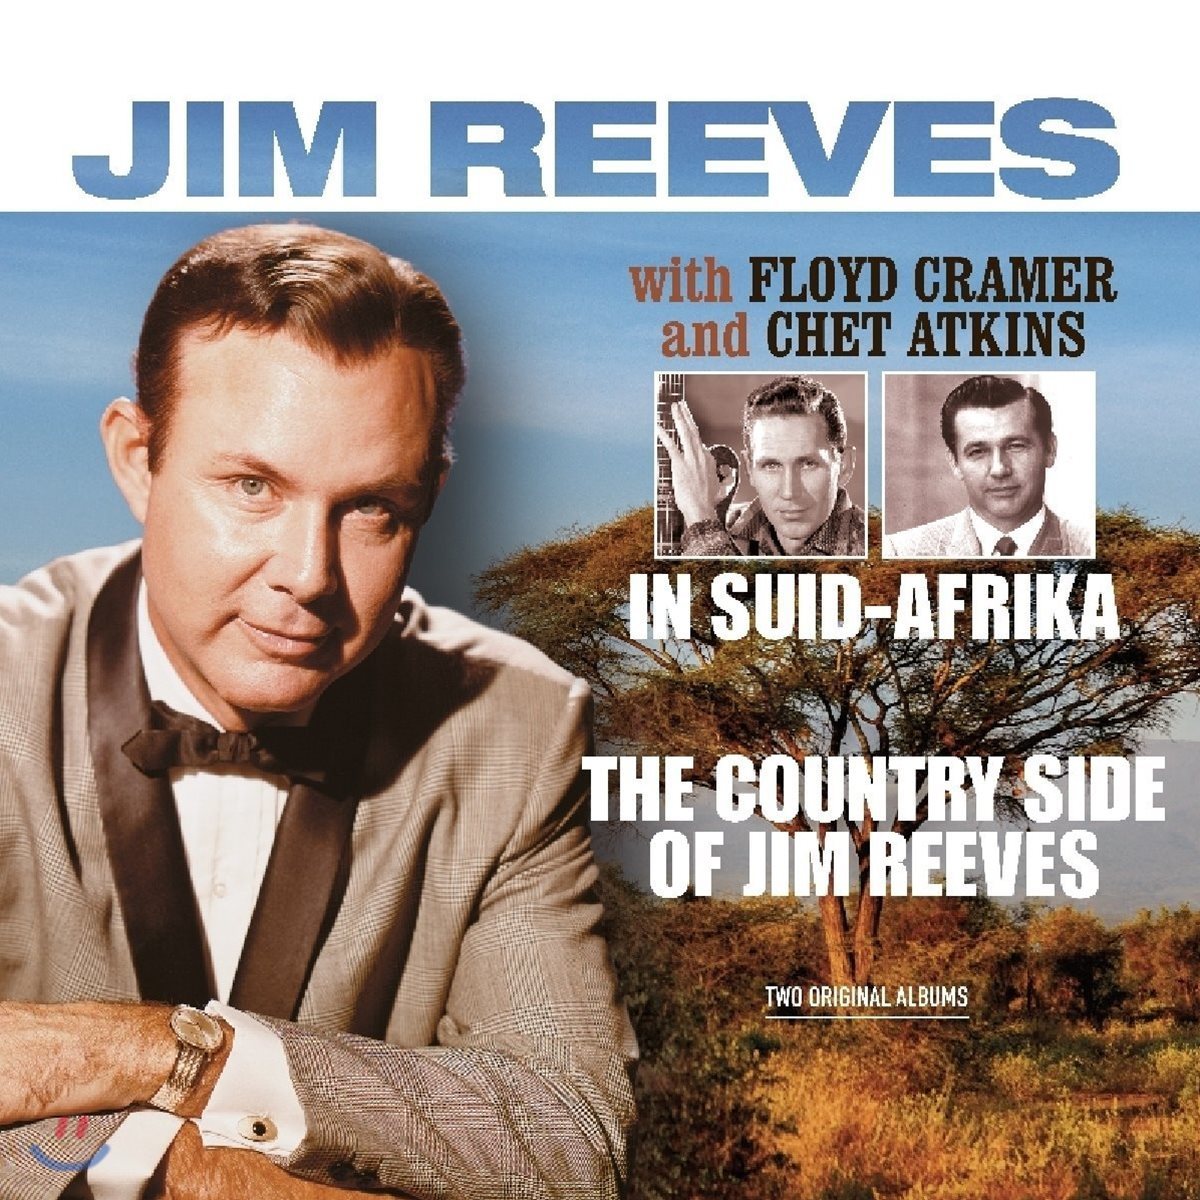 Jim Reeves & Floyd Cramer (짐 리브스, 플로이드 크래머) - The Country Side Of Jim Reeves / In Suid-Afrika [LP]